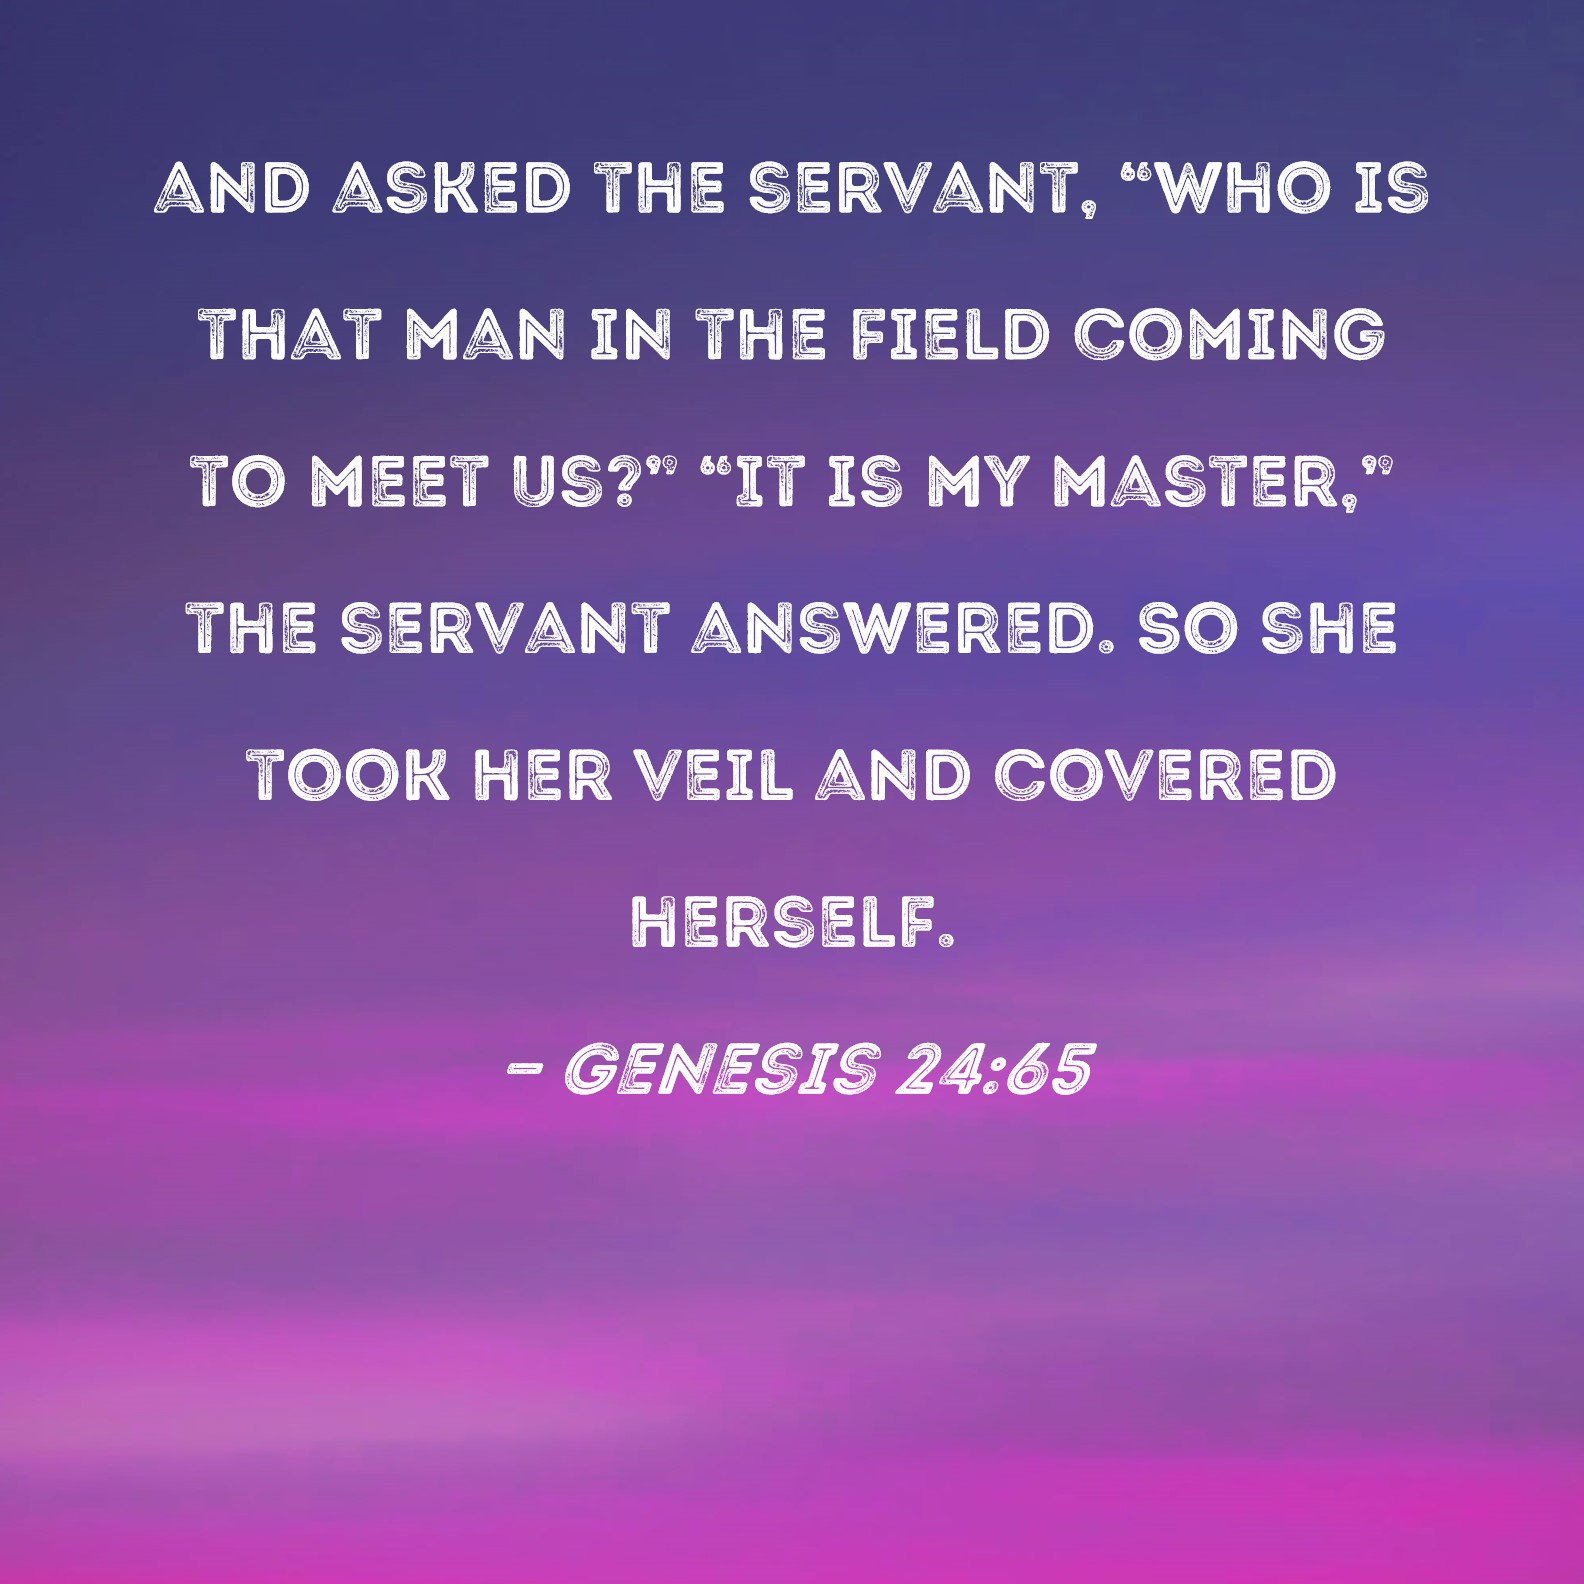 Genesis 24:65 and asked the servant, 